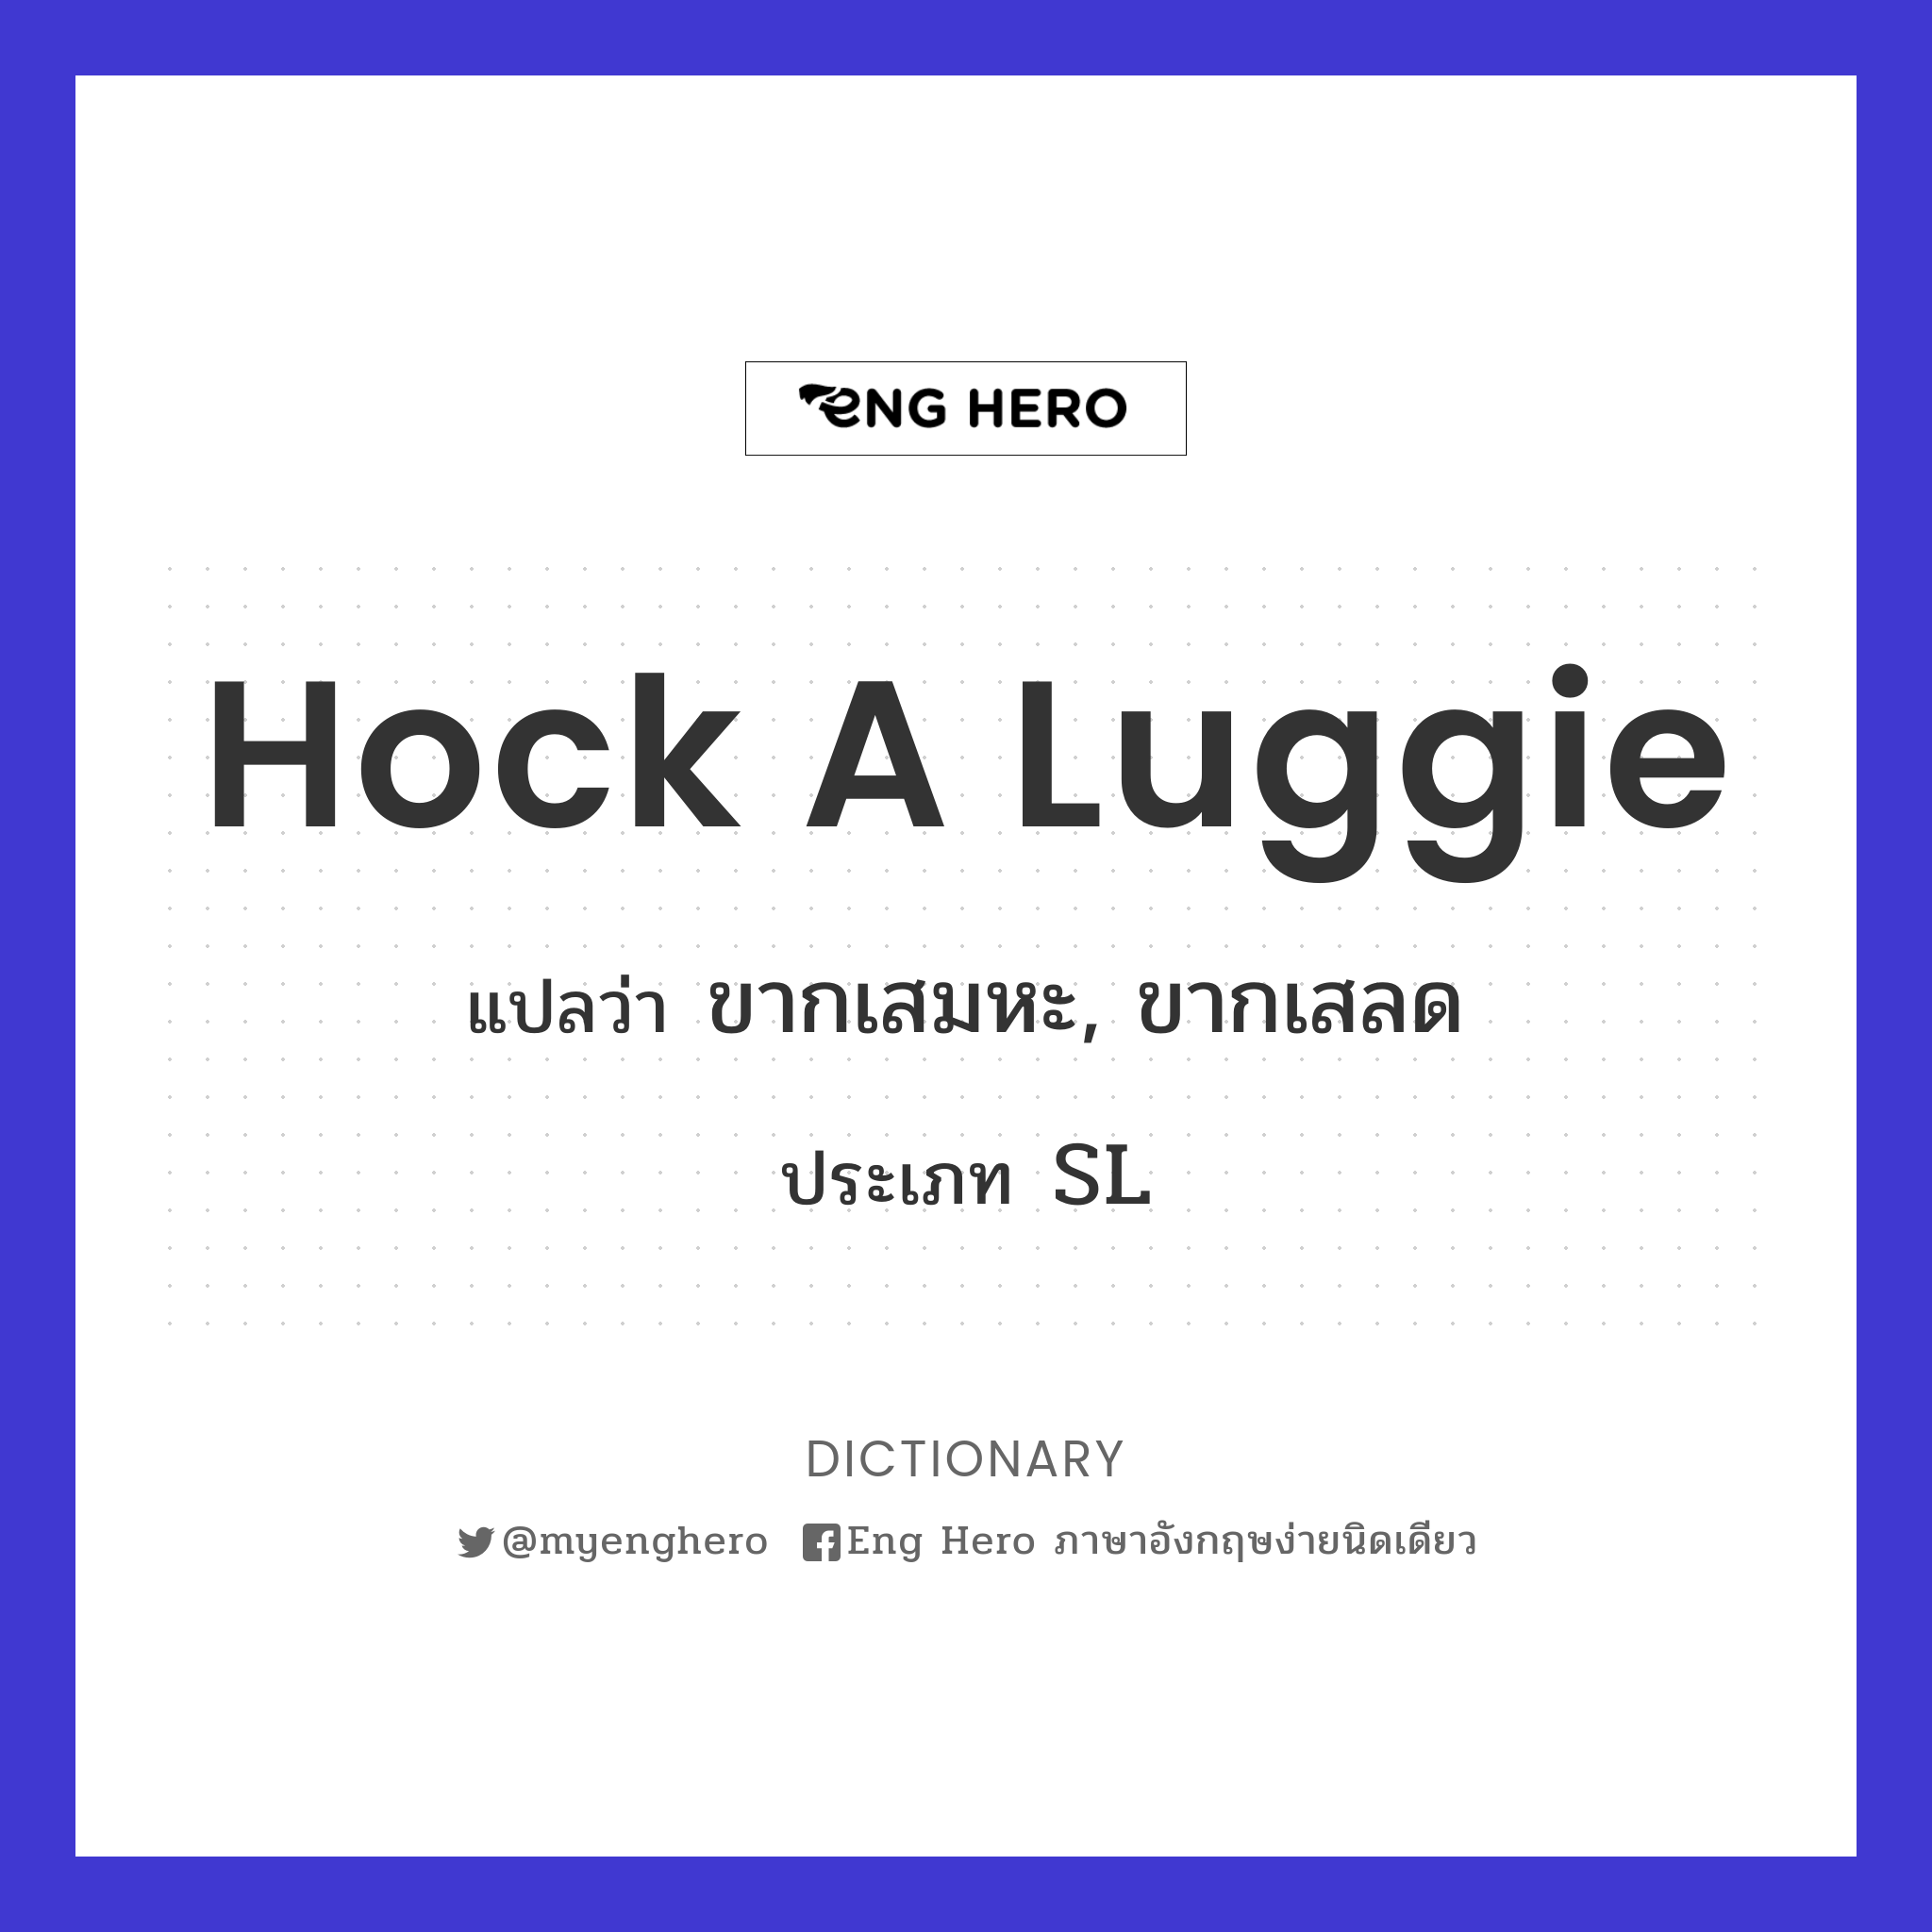 hock a luggie